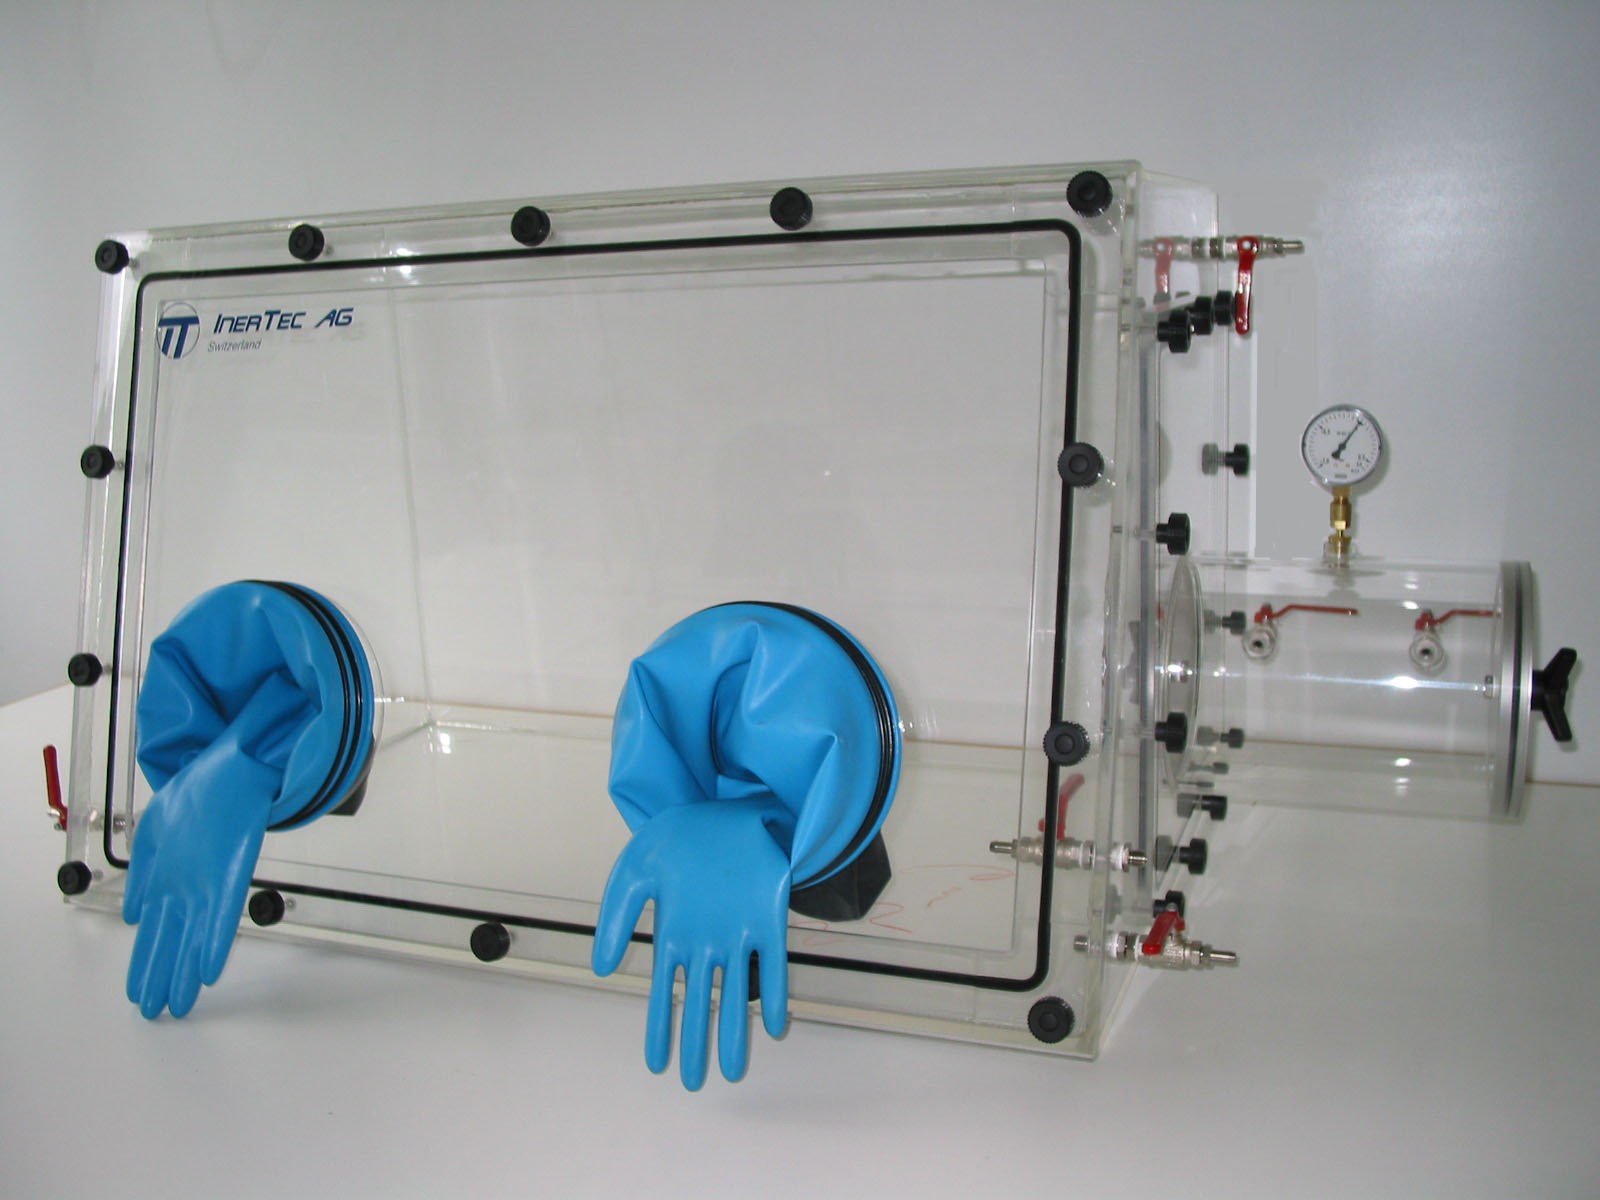 Glovebox made of acrylic&gt; Gas filling: by hand, front design: swivels upwards, side design: removable flange Control: humidity display